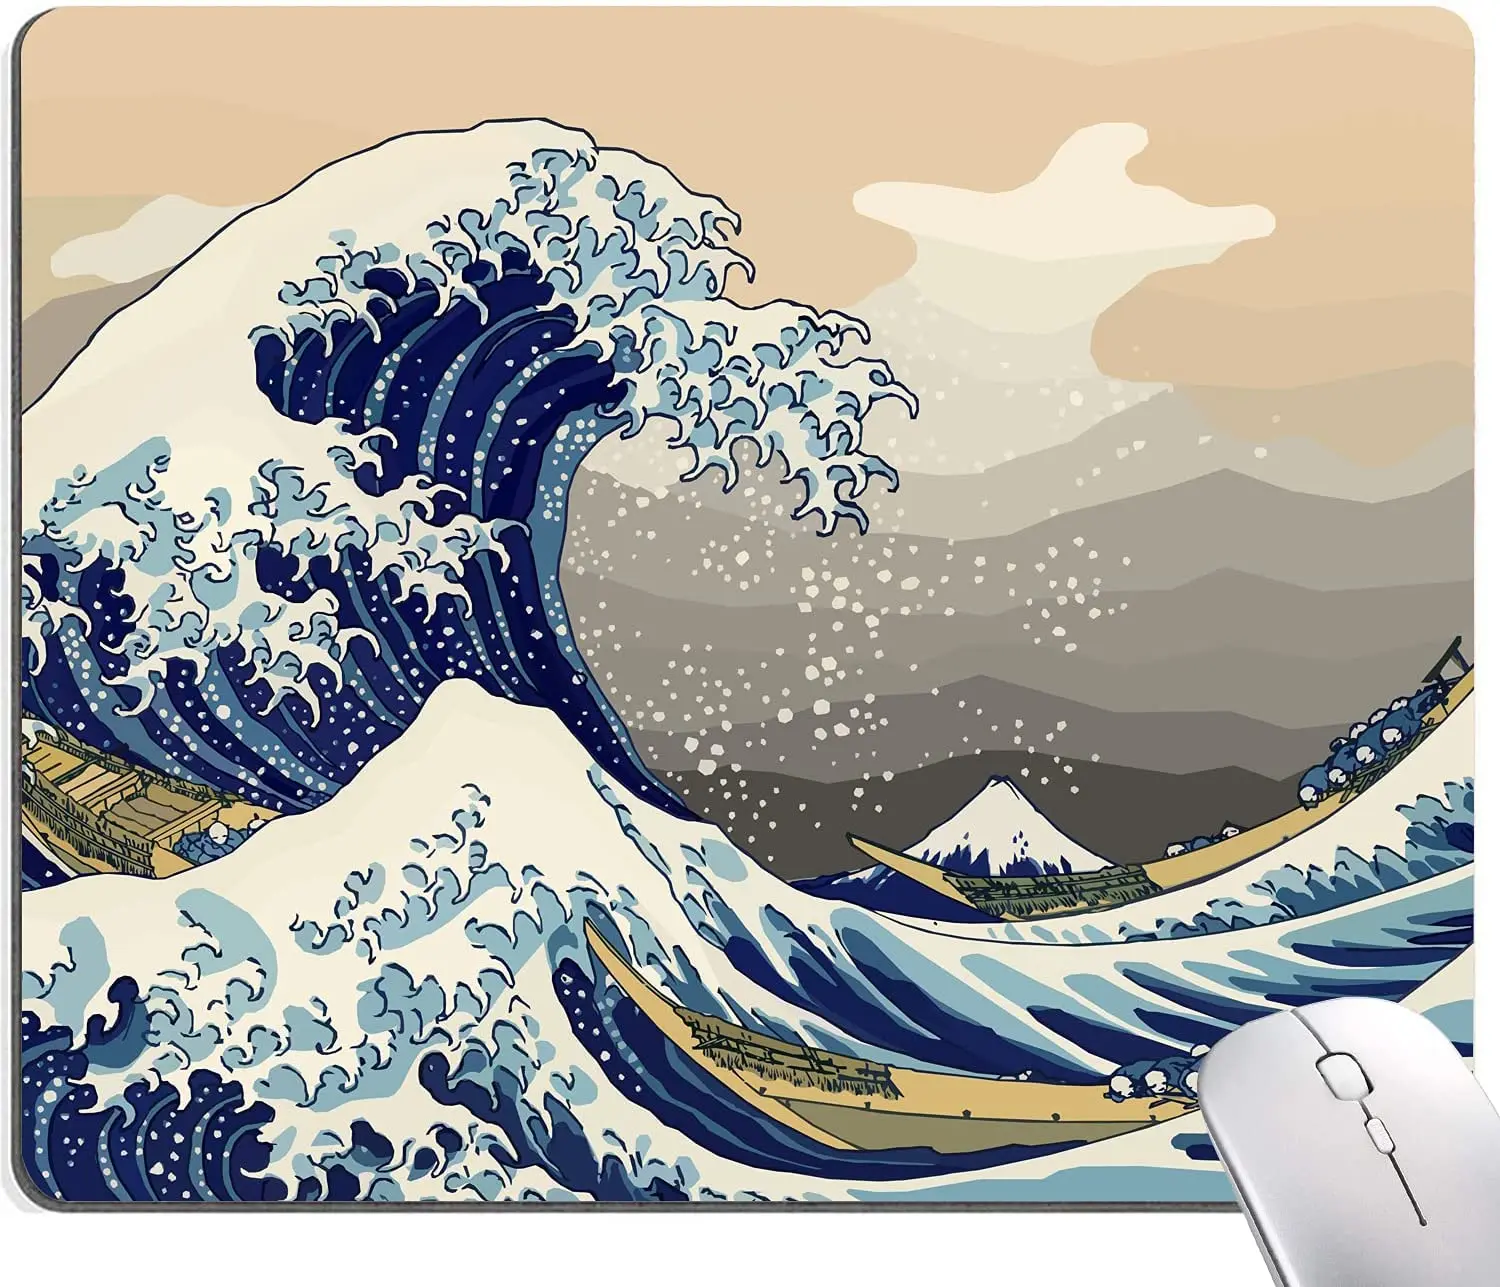 Japanese The Great Wave Mouse Pad Sea Wave Waterproof Mouse Pads Non-Slip Rubber Base Mouse Mat for Office Laptop 9.5x7.9 Inch